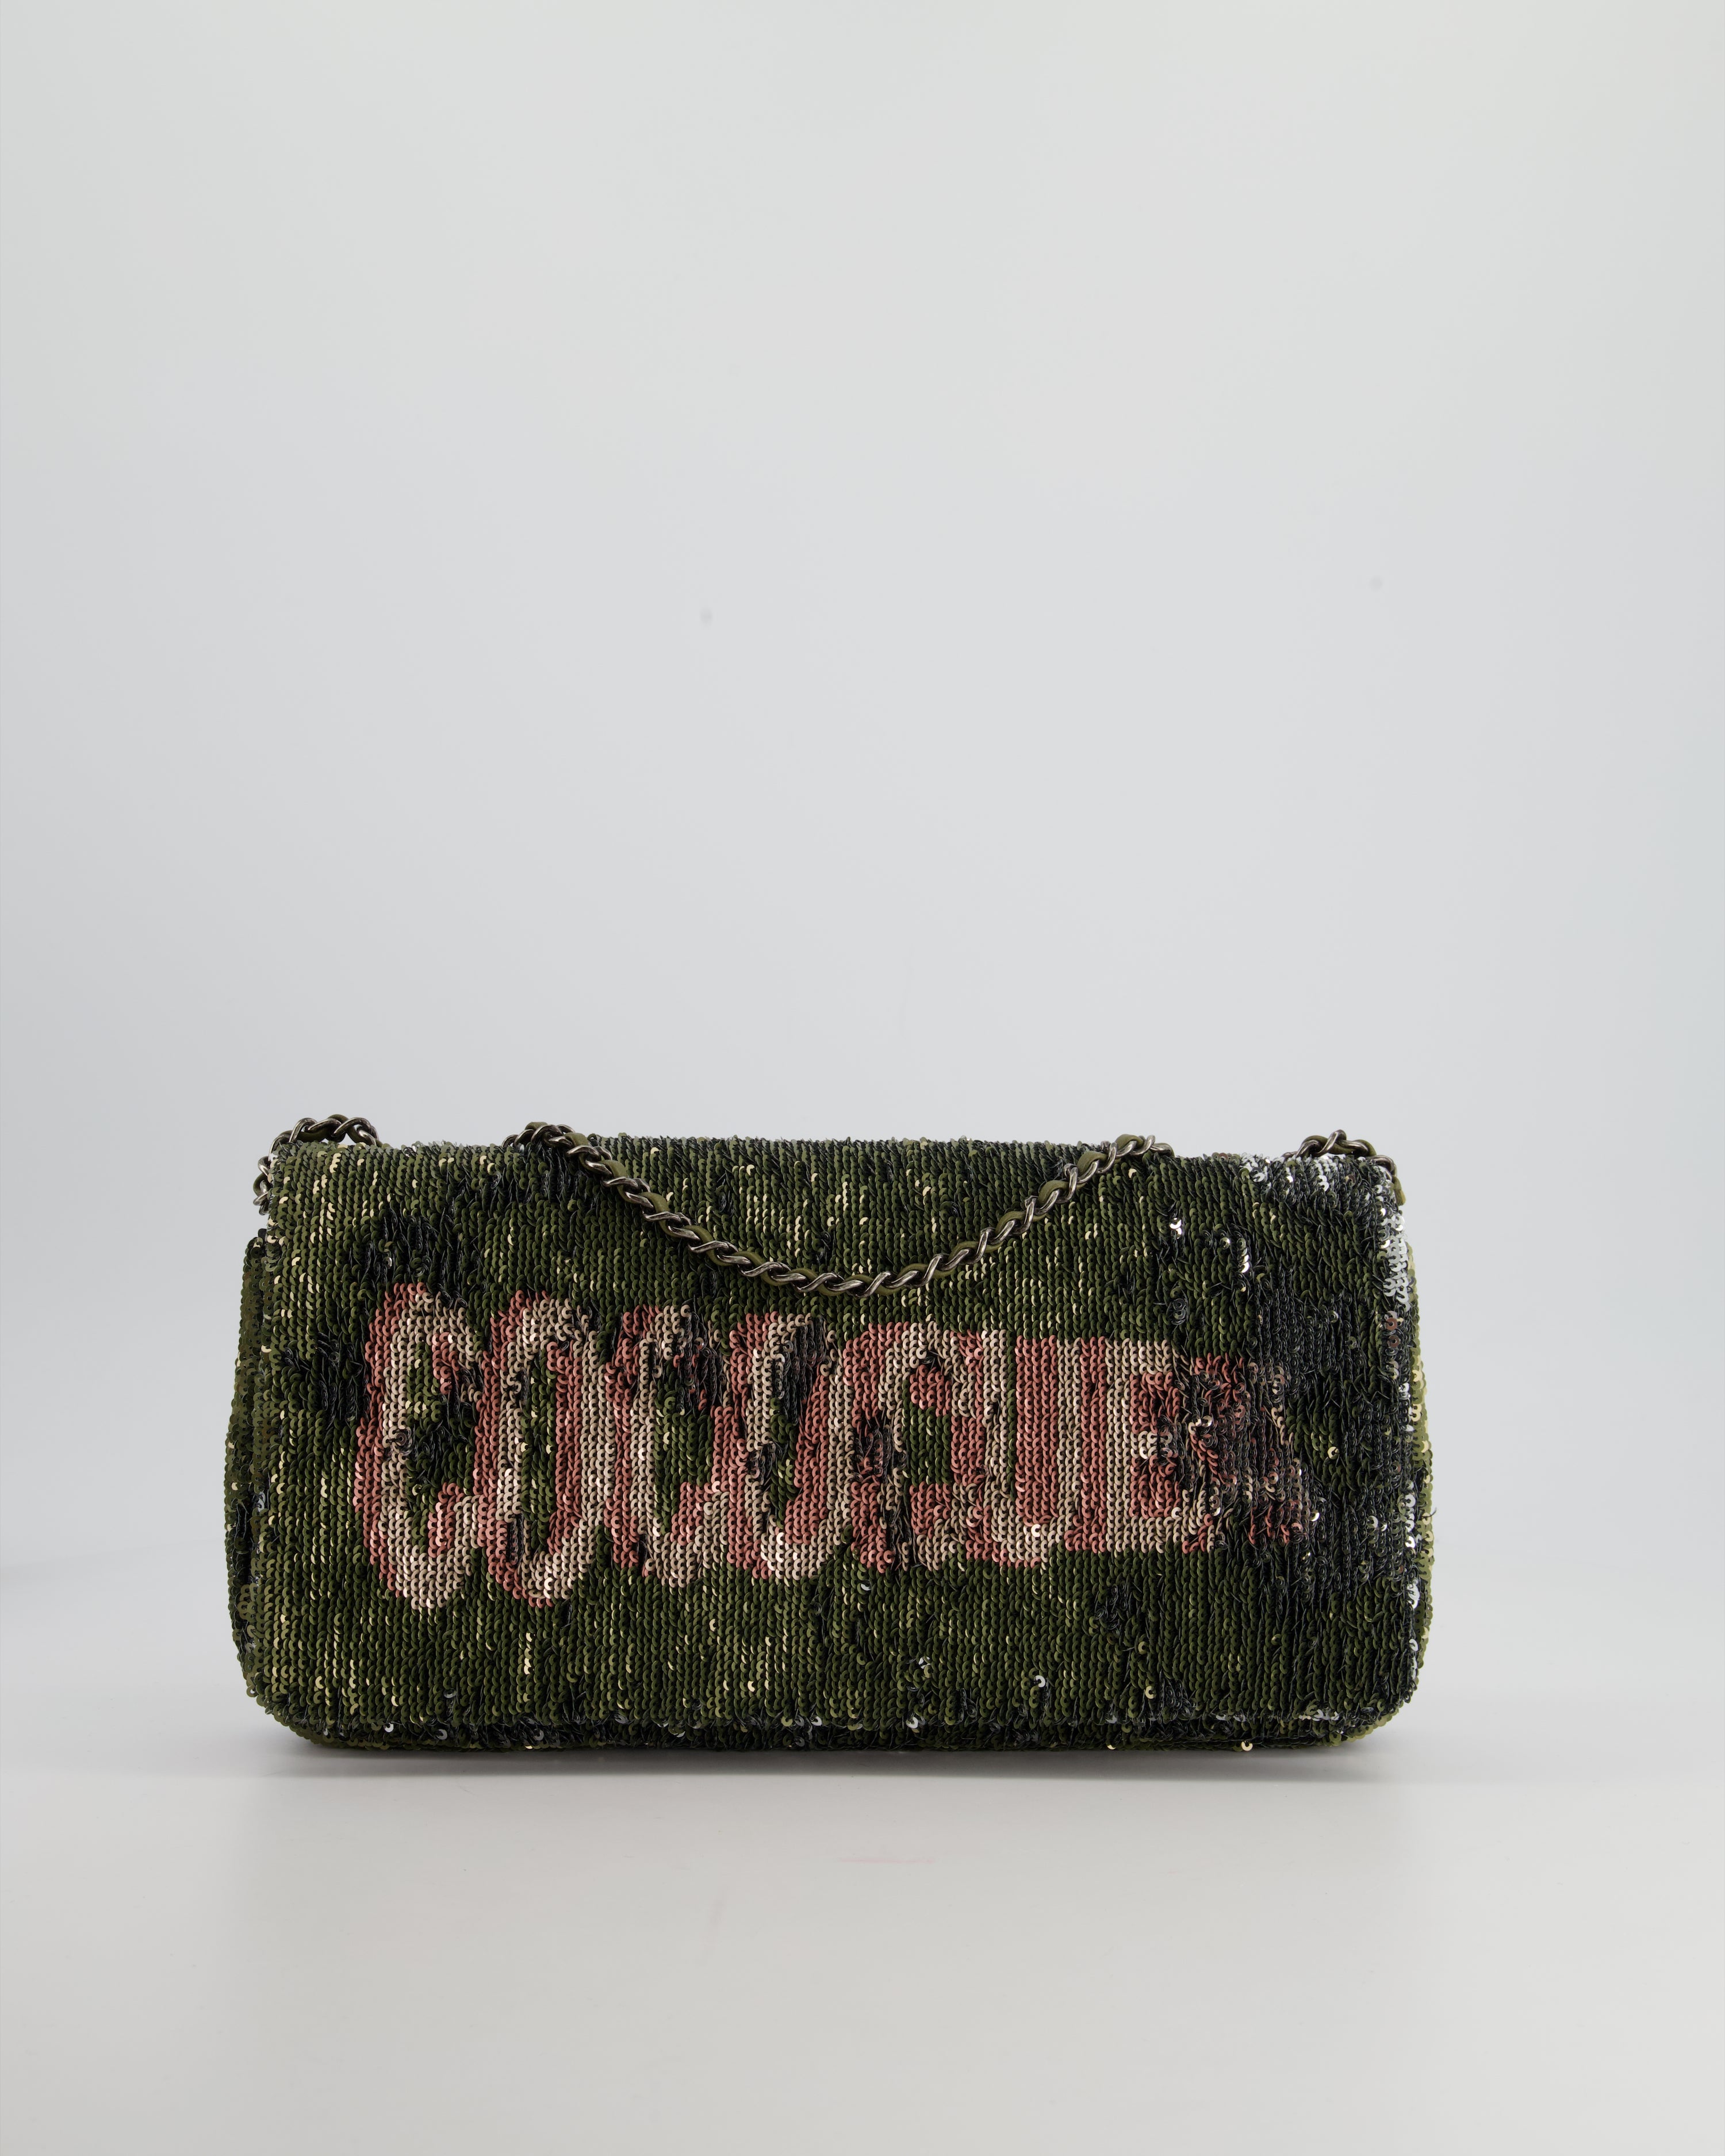 Limited Edition* Chanel Limited Edition Khaki Sequin Coco Cuba Bag – Sellier